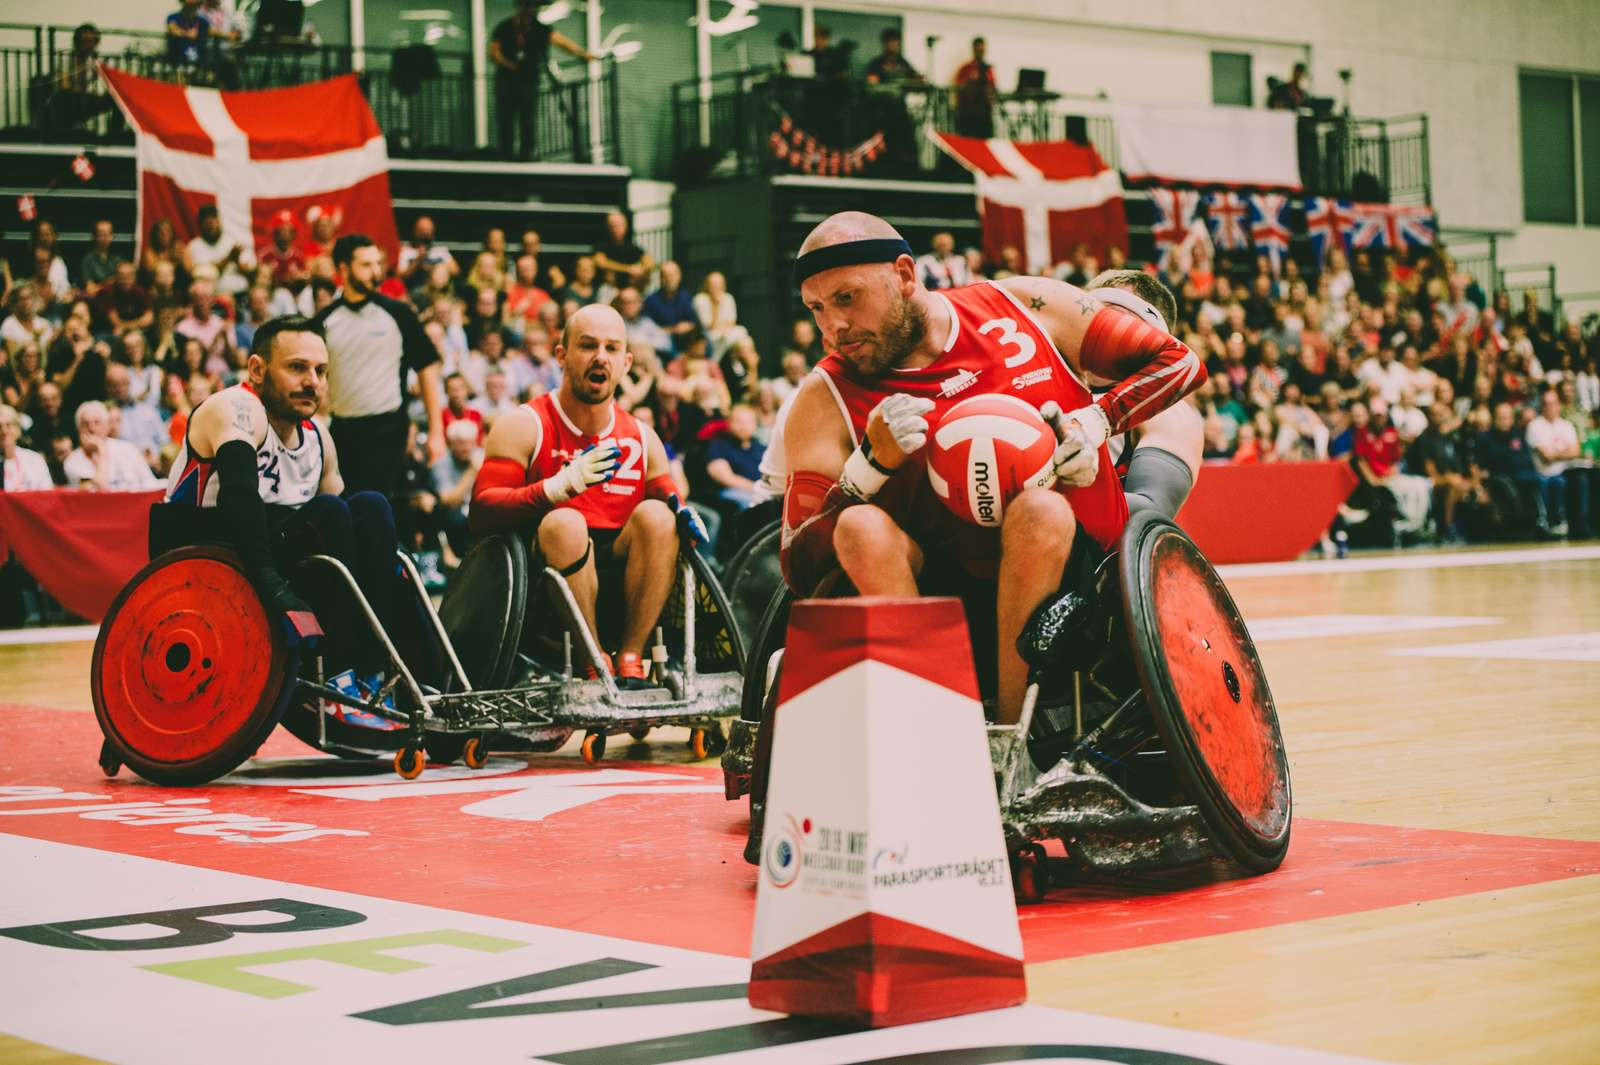 Hosts Denmark qualified for the Tokyo 2020 Paralympics despite their loss to Britain in the final ©IWRF